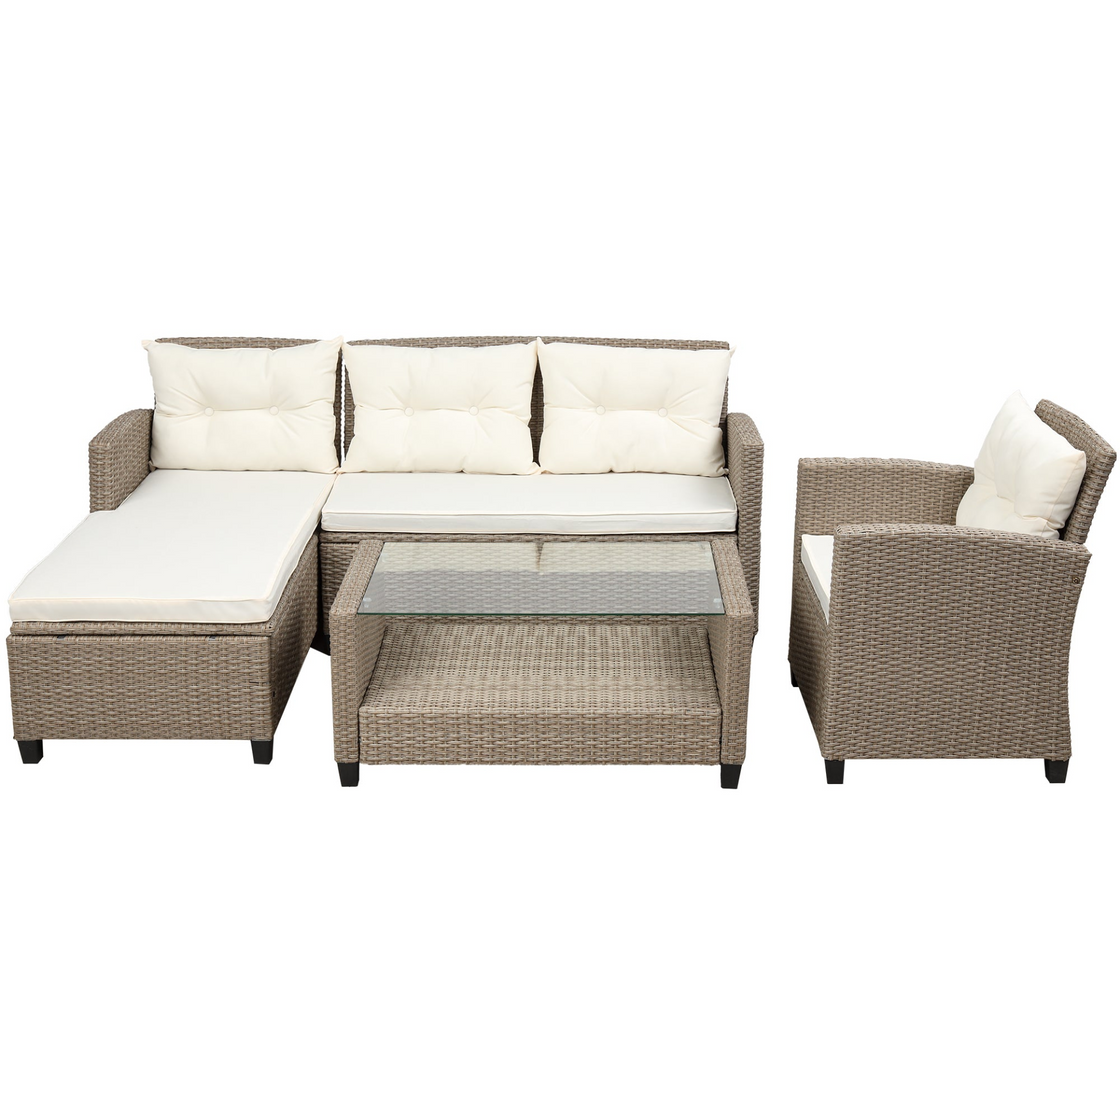 Outdoor, Patio Furniture Sets, 4 Piece Conversation Set Wicker Ratten Sectional Sofa with Seat Cushions (Beige Brown) - High Quality | Weather Resistant